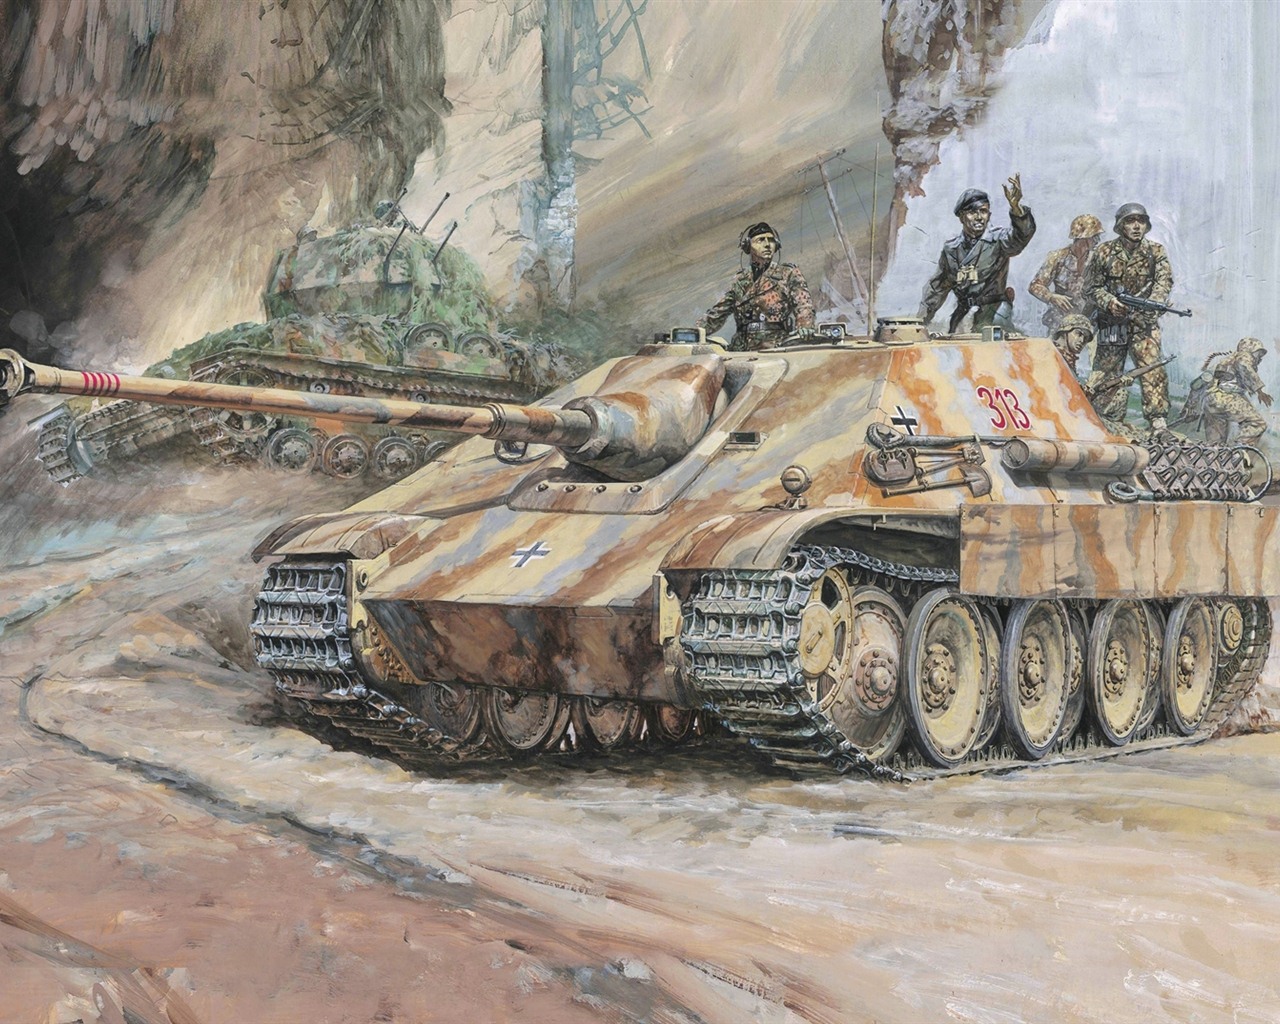 Military tanks, armored HD painting wallpapers #4 - 1280x1024